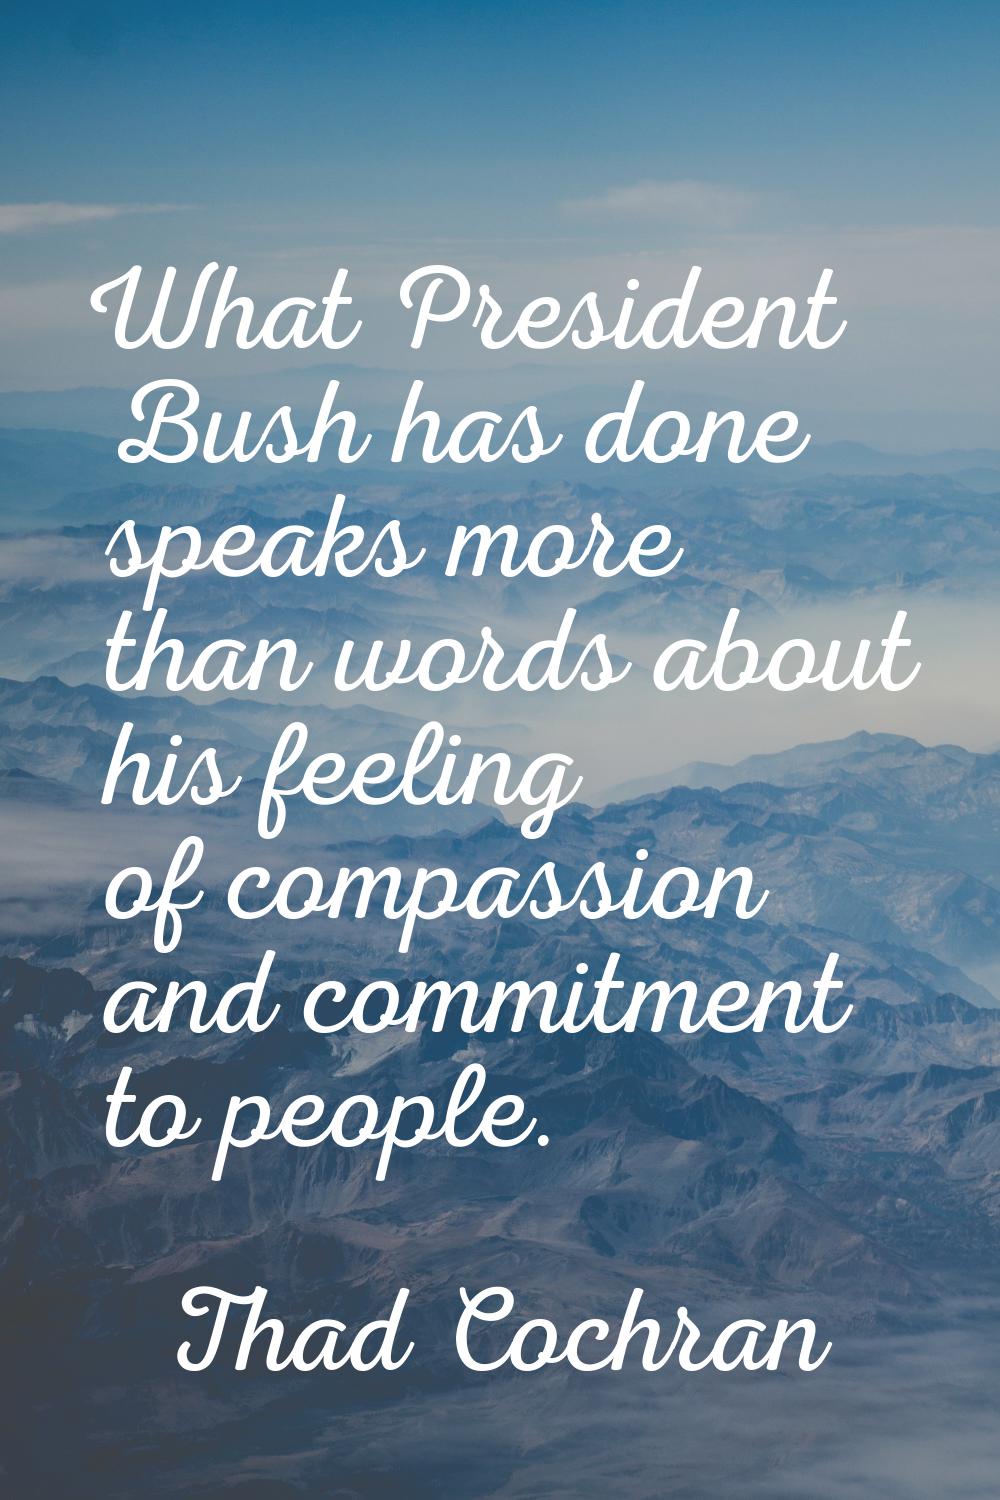 What President Bush has done speaks more than words about his feeling of compassion and commitment 